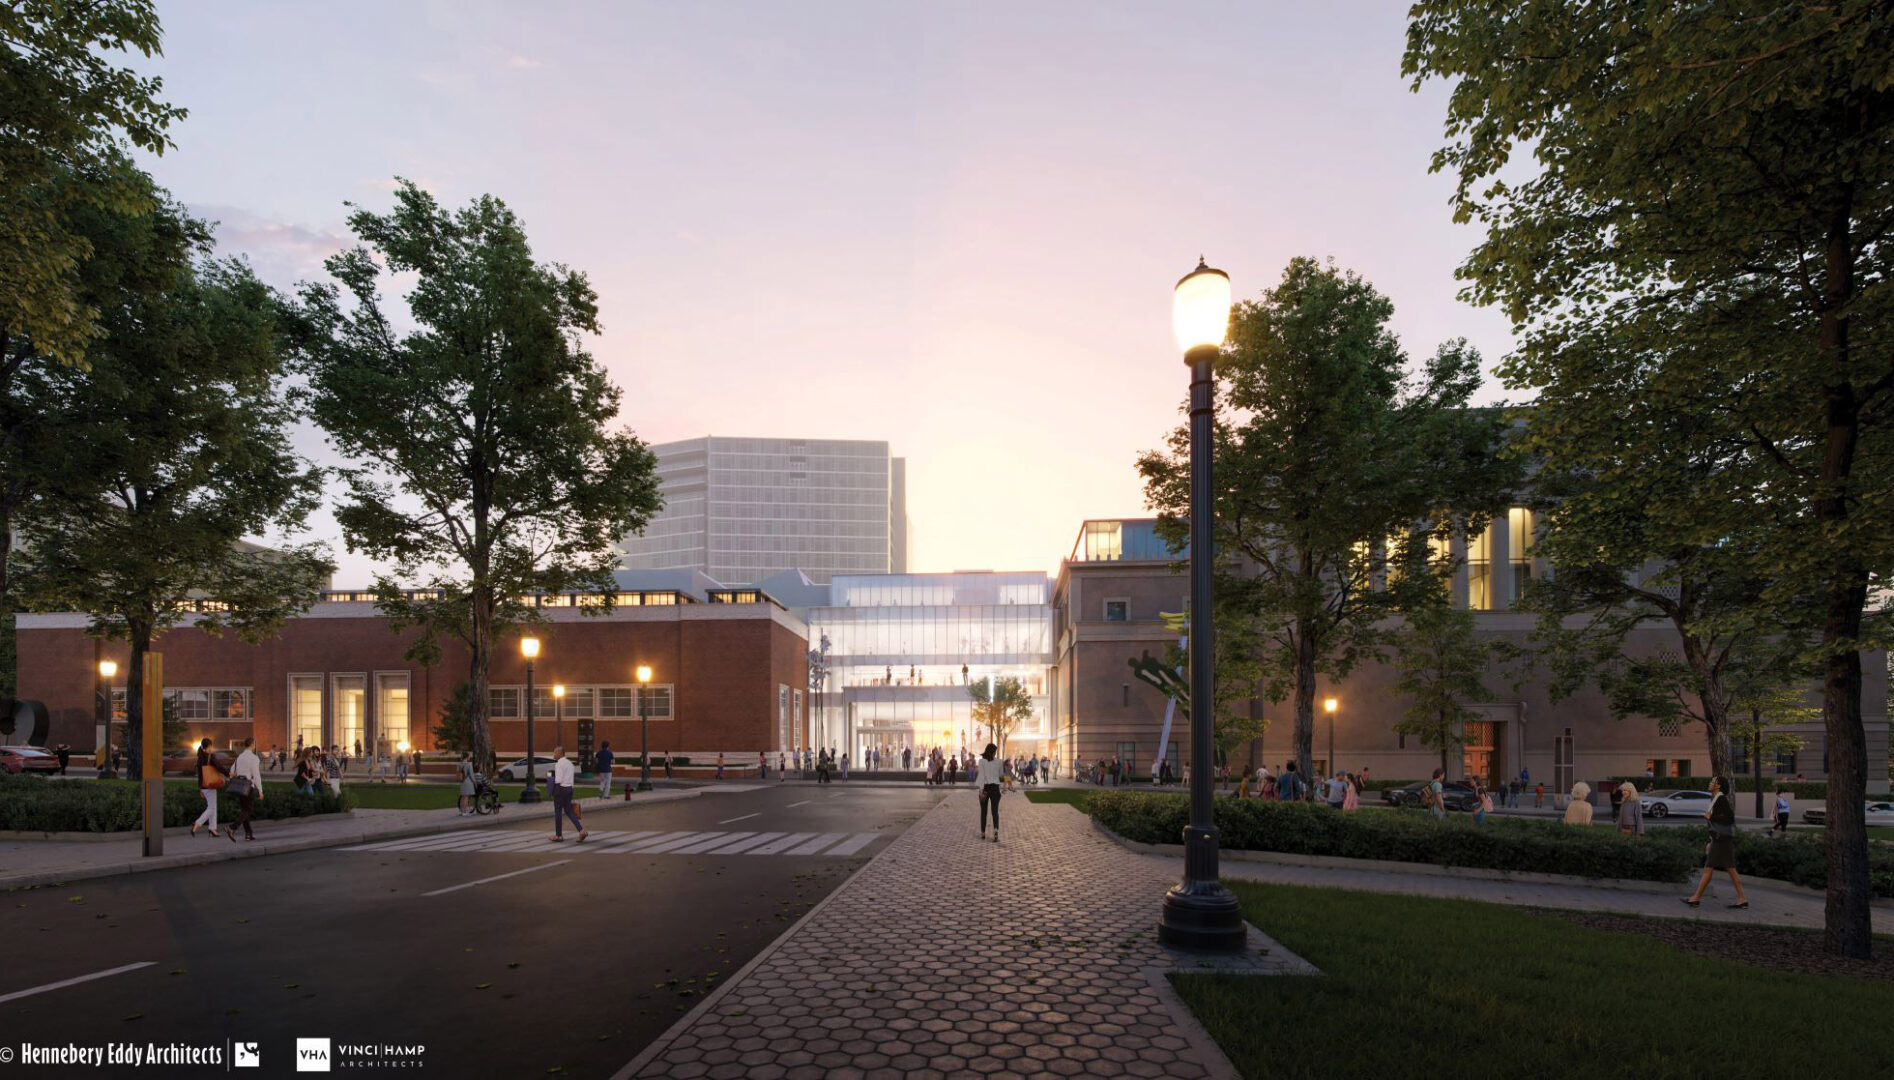 Architectural rendering of the new Rothko Pavilion at dusk as seen from the South Park Block at SW Madison Street and SW Park Avenue.